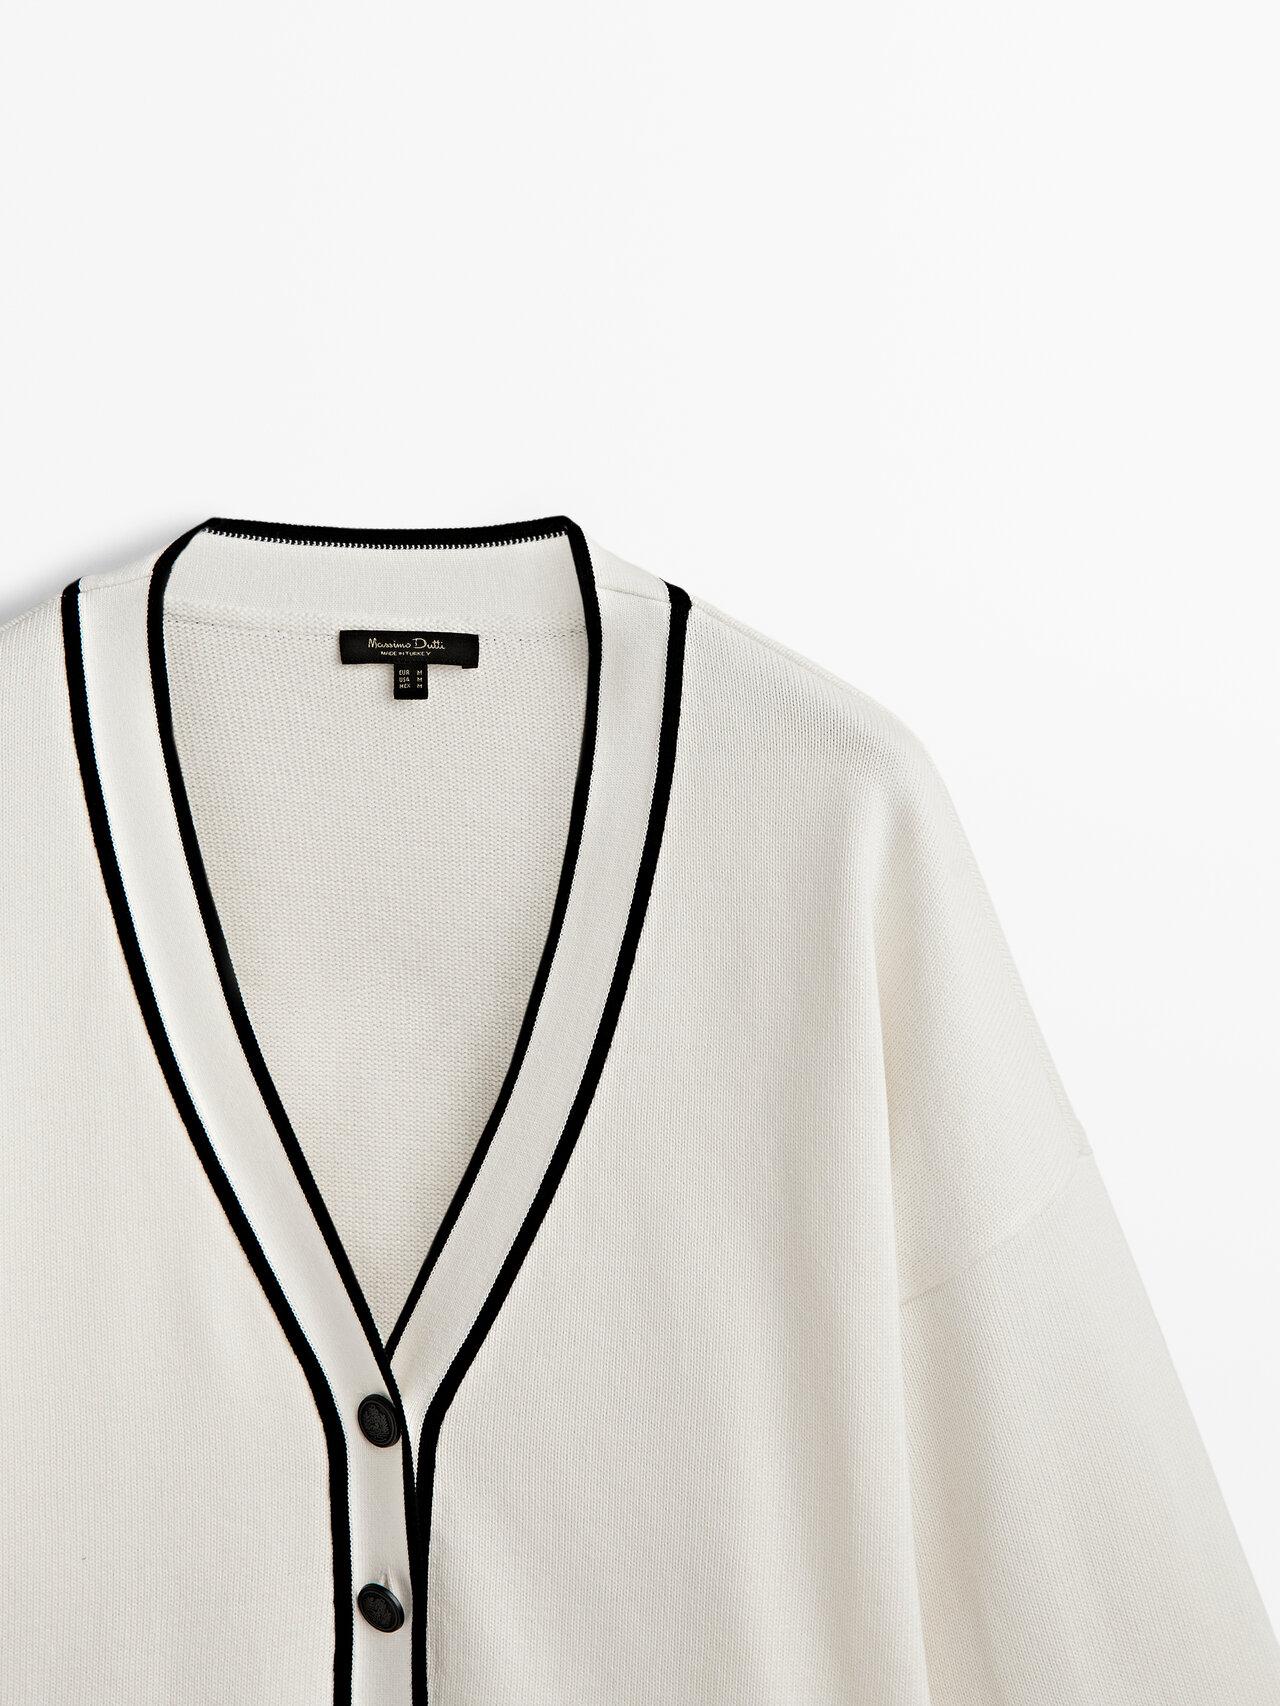 MASSIMO DUTTI Contrast Cotton Cardigan in Natural | Lyst